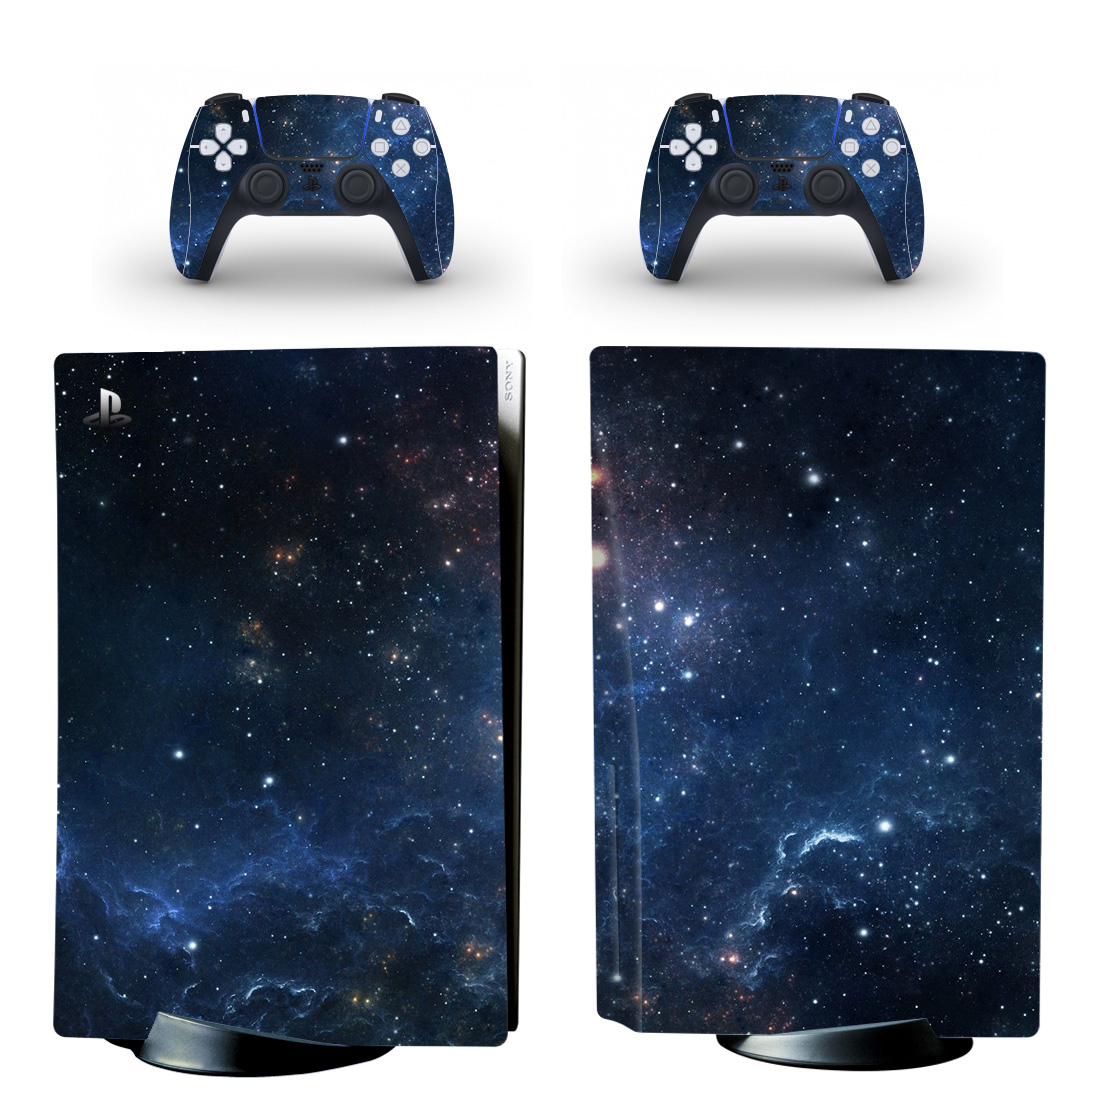 Night Sky With Stars And Clouds Console Skin Sticker And Controllers